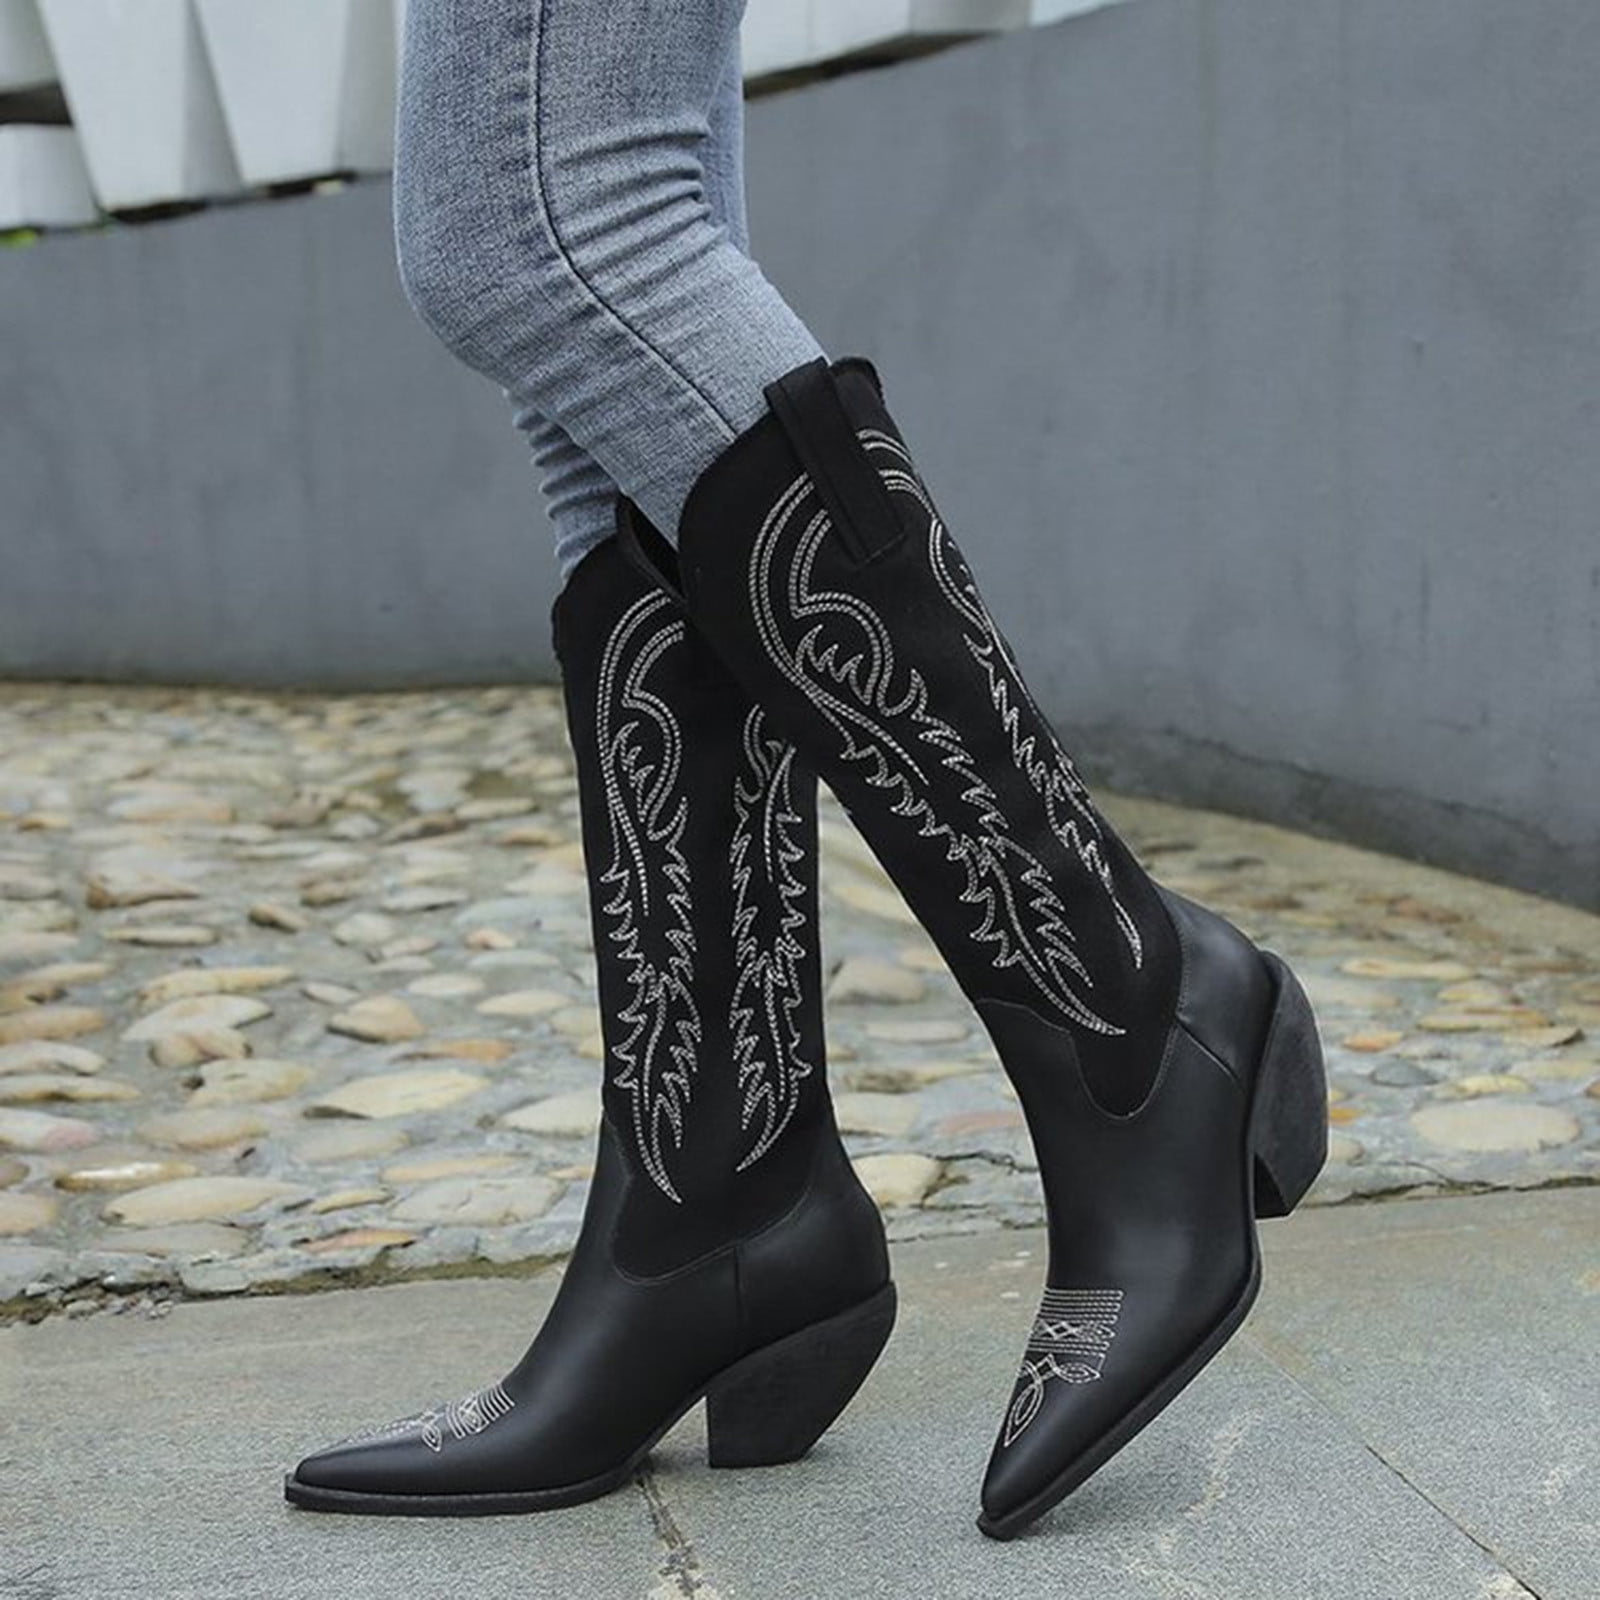 Wide Calf Boots black casual look Shoes High Boots Wide Calf Boots 